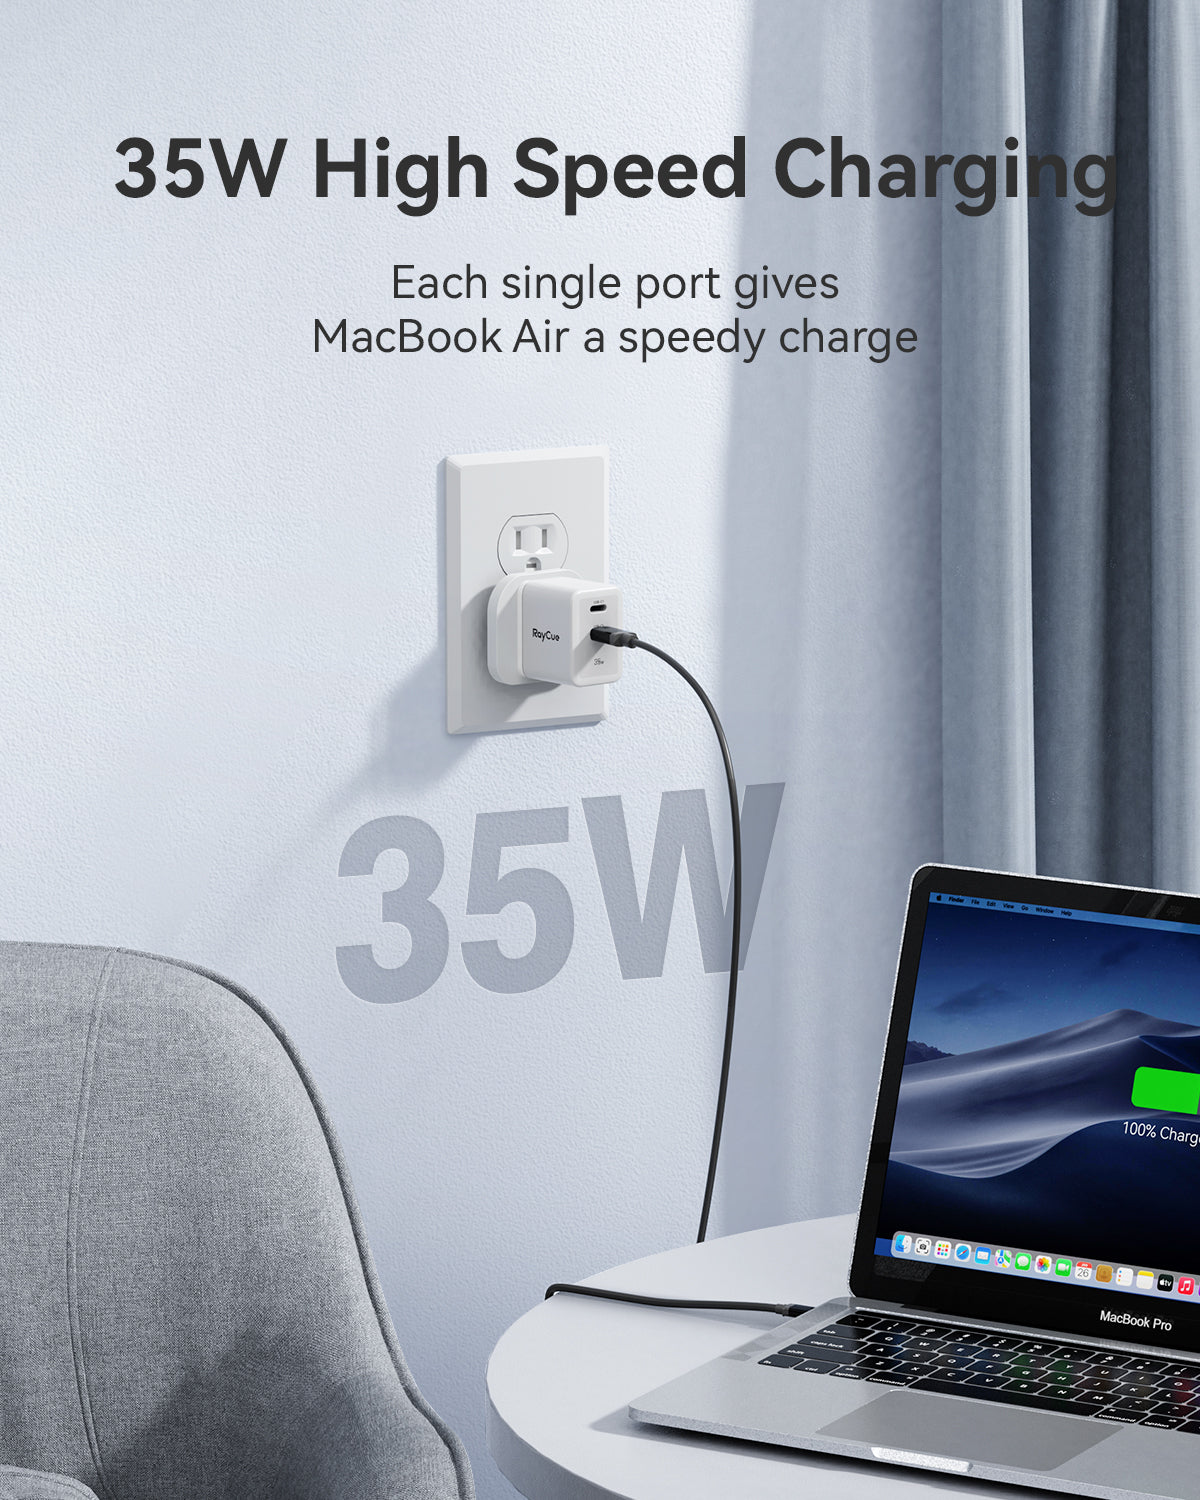 RayCue BlitzCharge GaN 35W 2-Port USB PD Charger for MacBook, iPhone, iPad